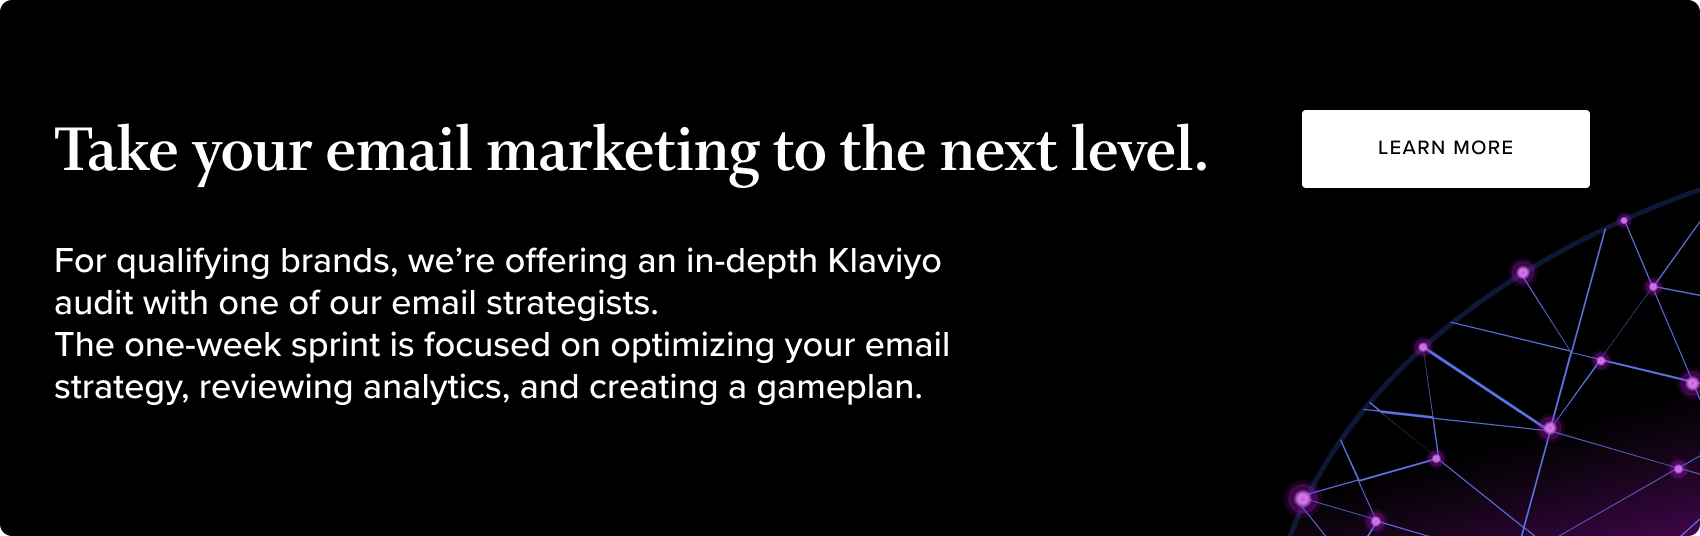 Take your email marketing to the next level.